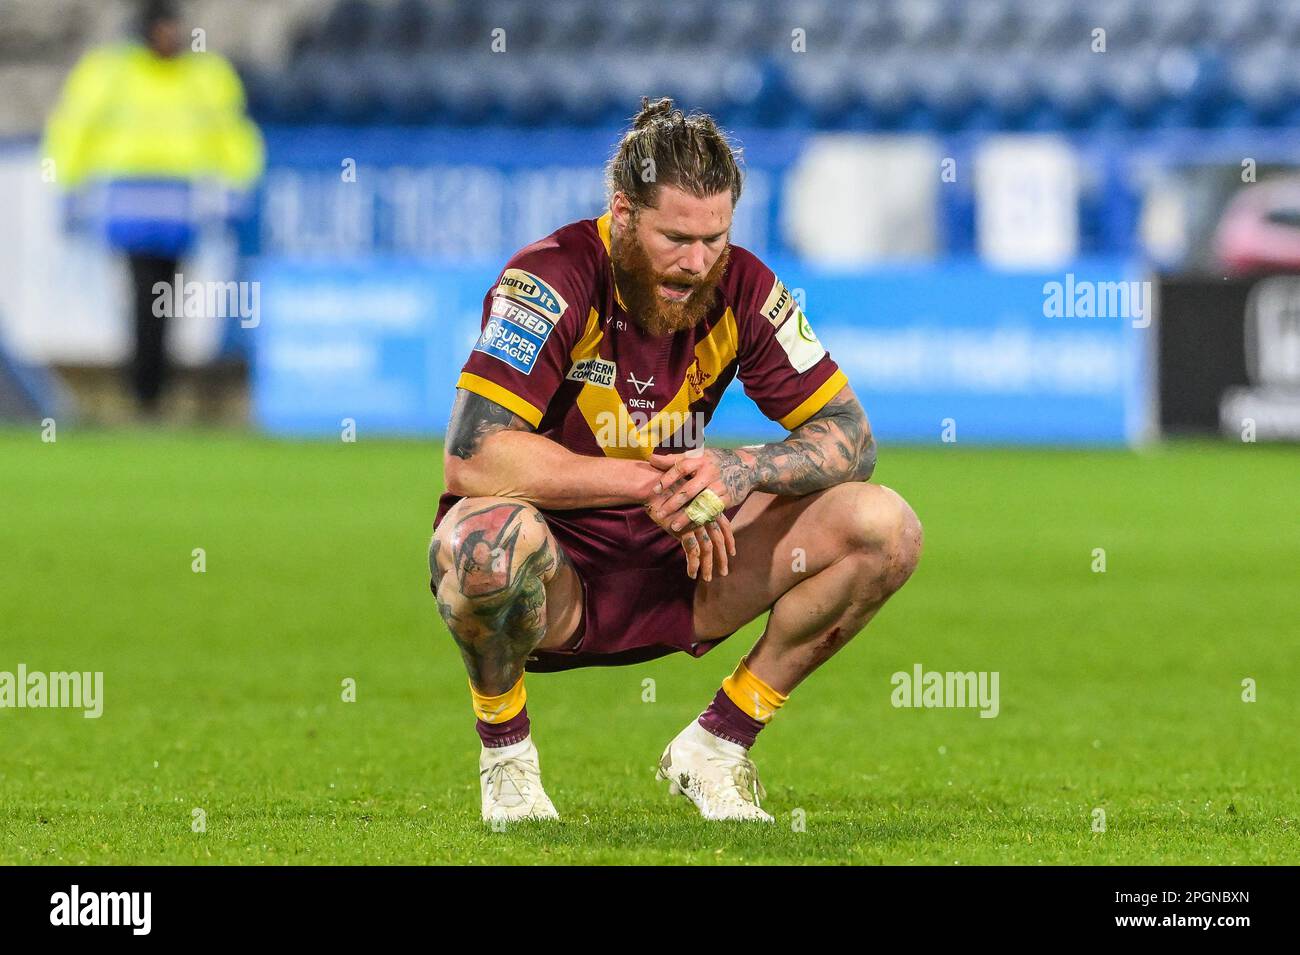 Chris McQueen #12 of Huddersfield Giants is dejected at the final whistle during the Betfred Super League Round 6 match Huddersfield Giants vs St Helens at John Smith's Stadium, Huddersfield, United Kingdom, 23rd March 2023  (Photo by Craig Thomas/News Images) Stock Photo